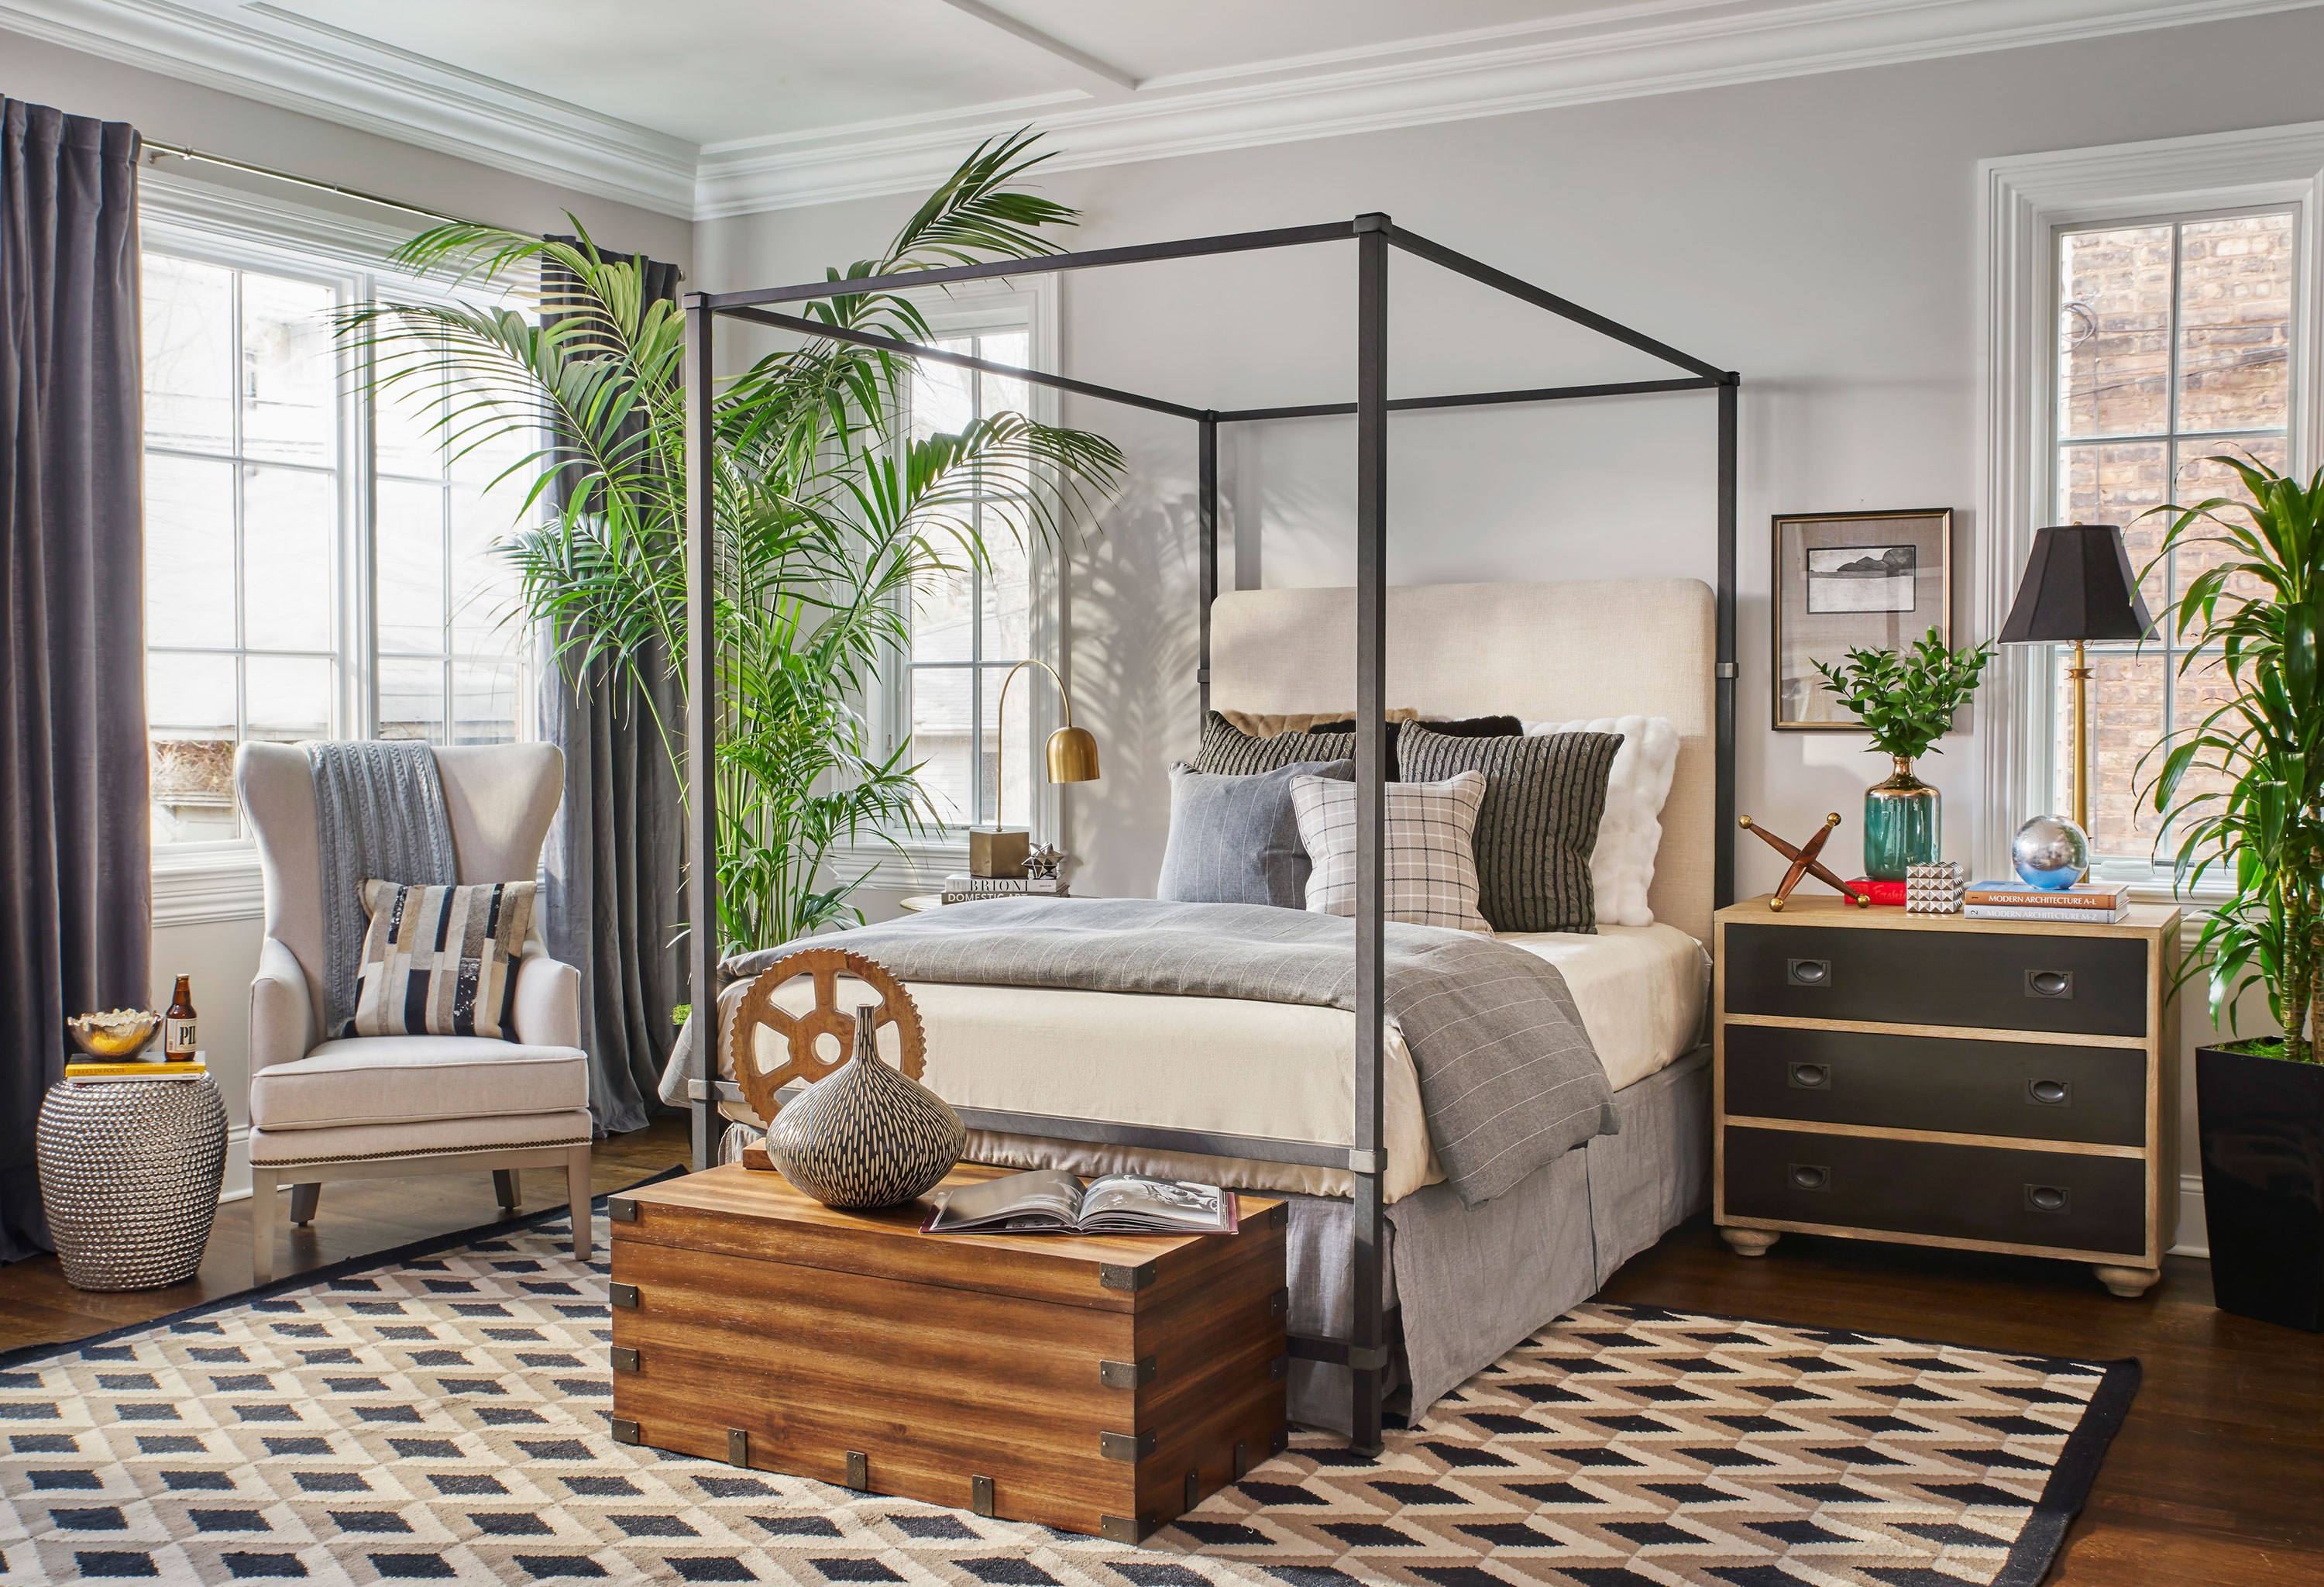 “Matching furniture sets can be boring and unimaginative. I intentionally mismatch pieces for visual diversity. In this bedroom, I balanced a heavy bedside table with a tall tree and accent chair for symmetry. The high ceilings were prone to shrink most beds, but we chose a tall iron canopy bed that fit the space perfectly.”